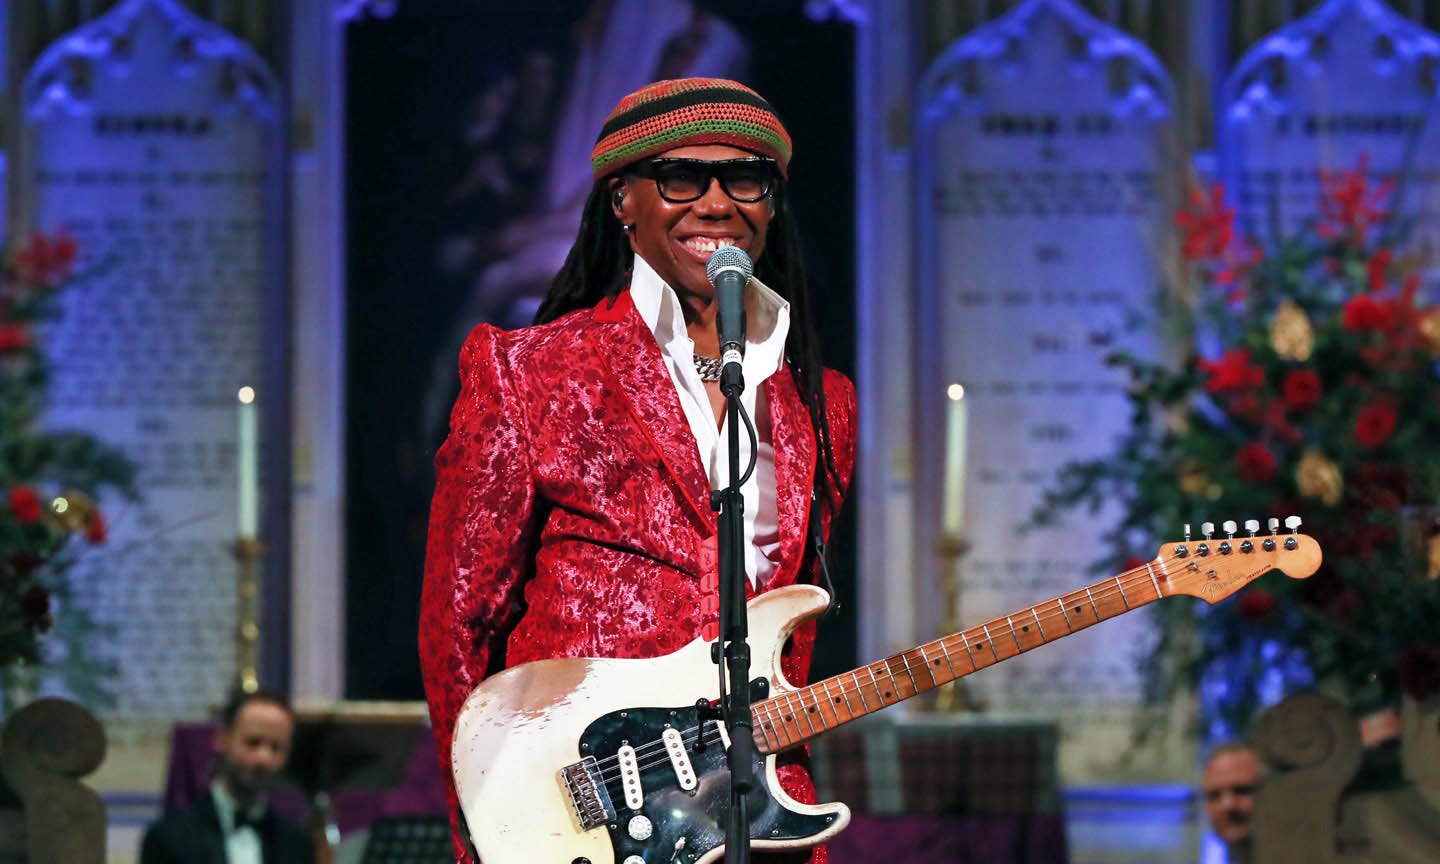 Nile Rodgers And Chic Raise £125,000 For Nordoff Robbins Charity